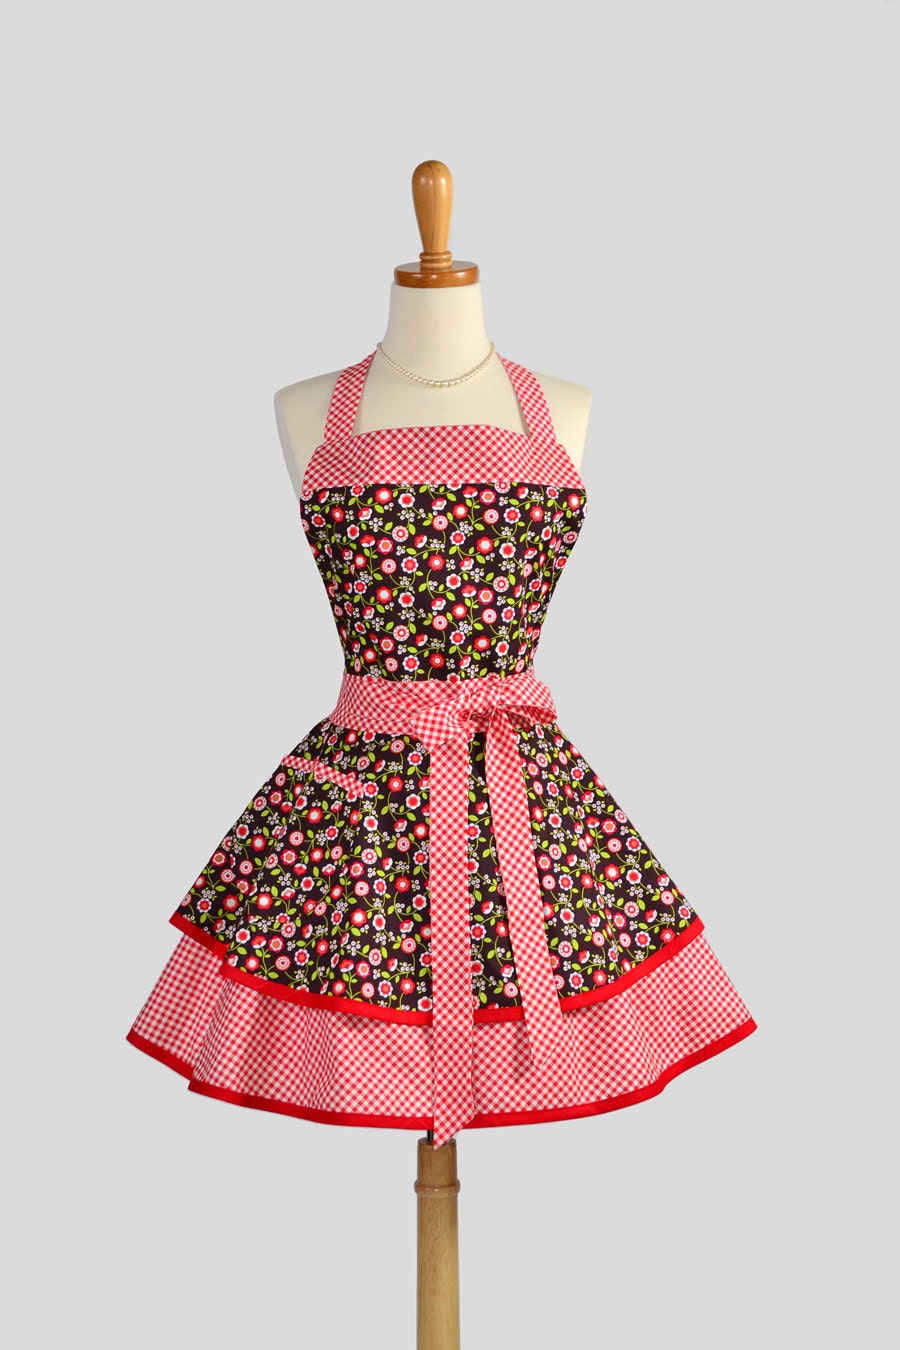 Ruffled Retro Apron - Cute Womens Apron in Country Fall Floral with Flirty Gingham Handmade Full Kitchen Apron